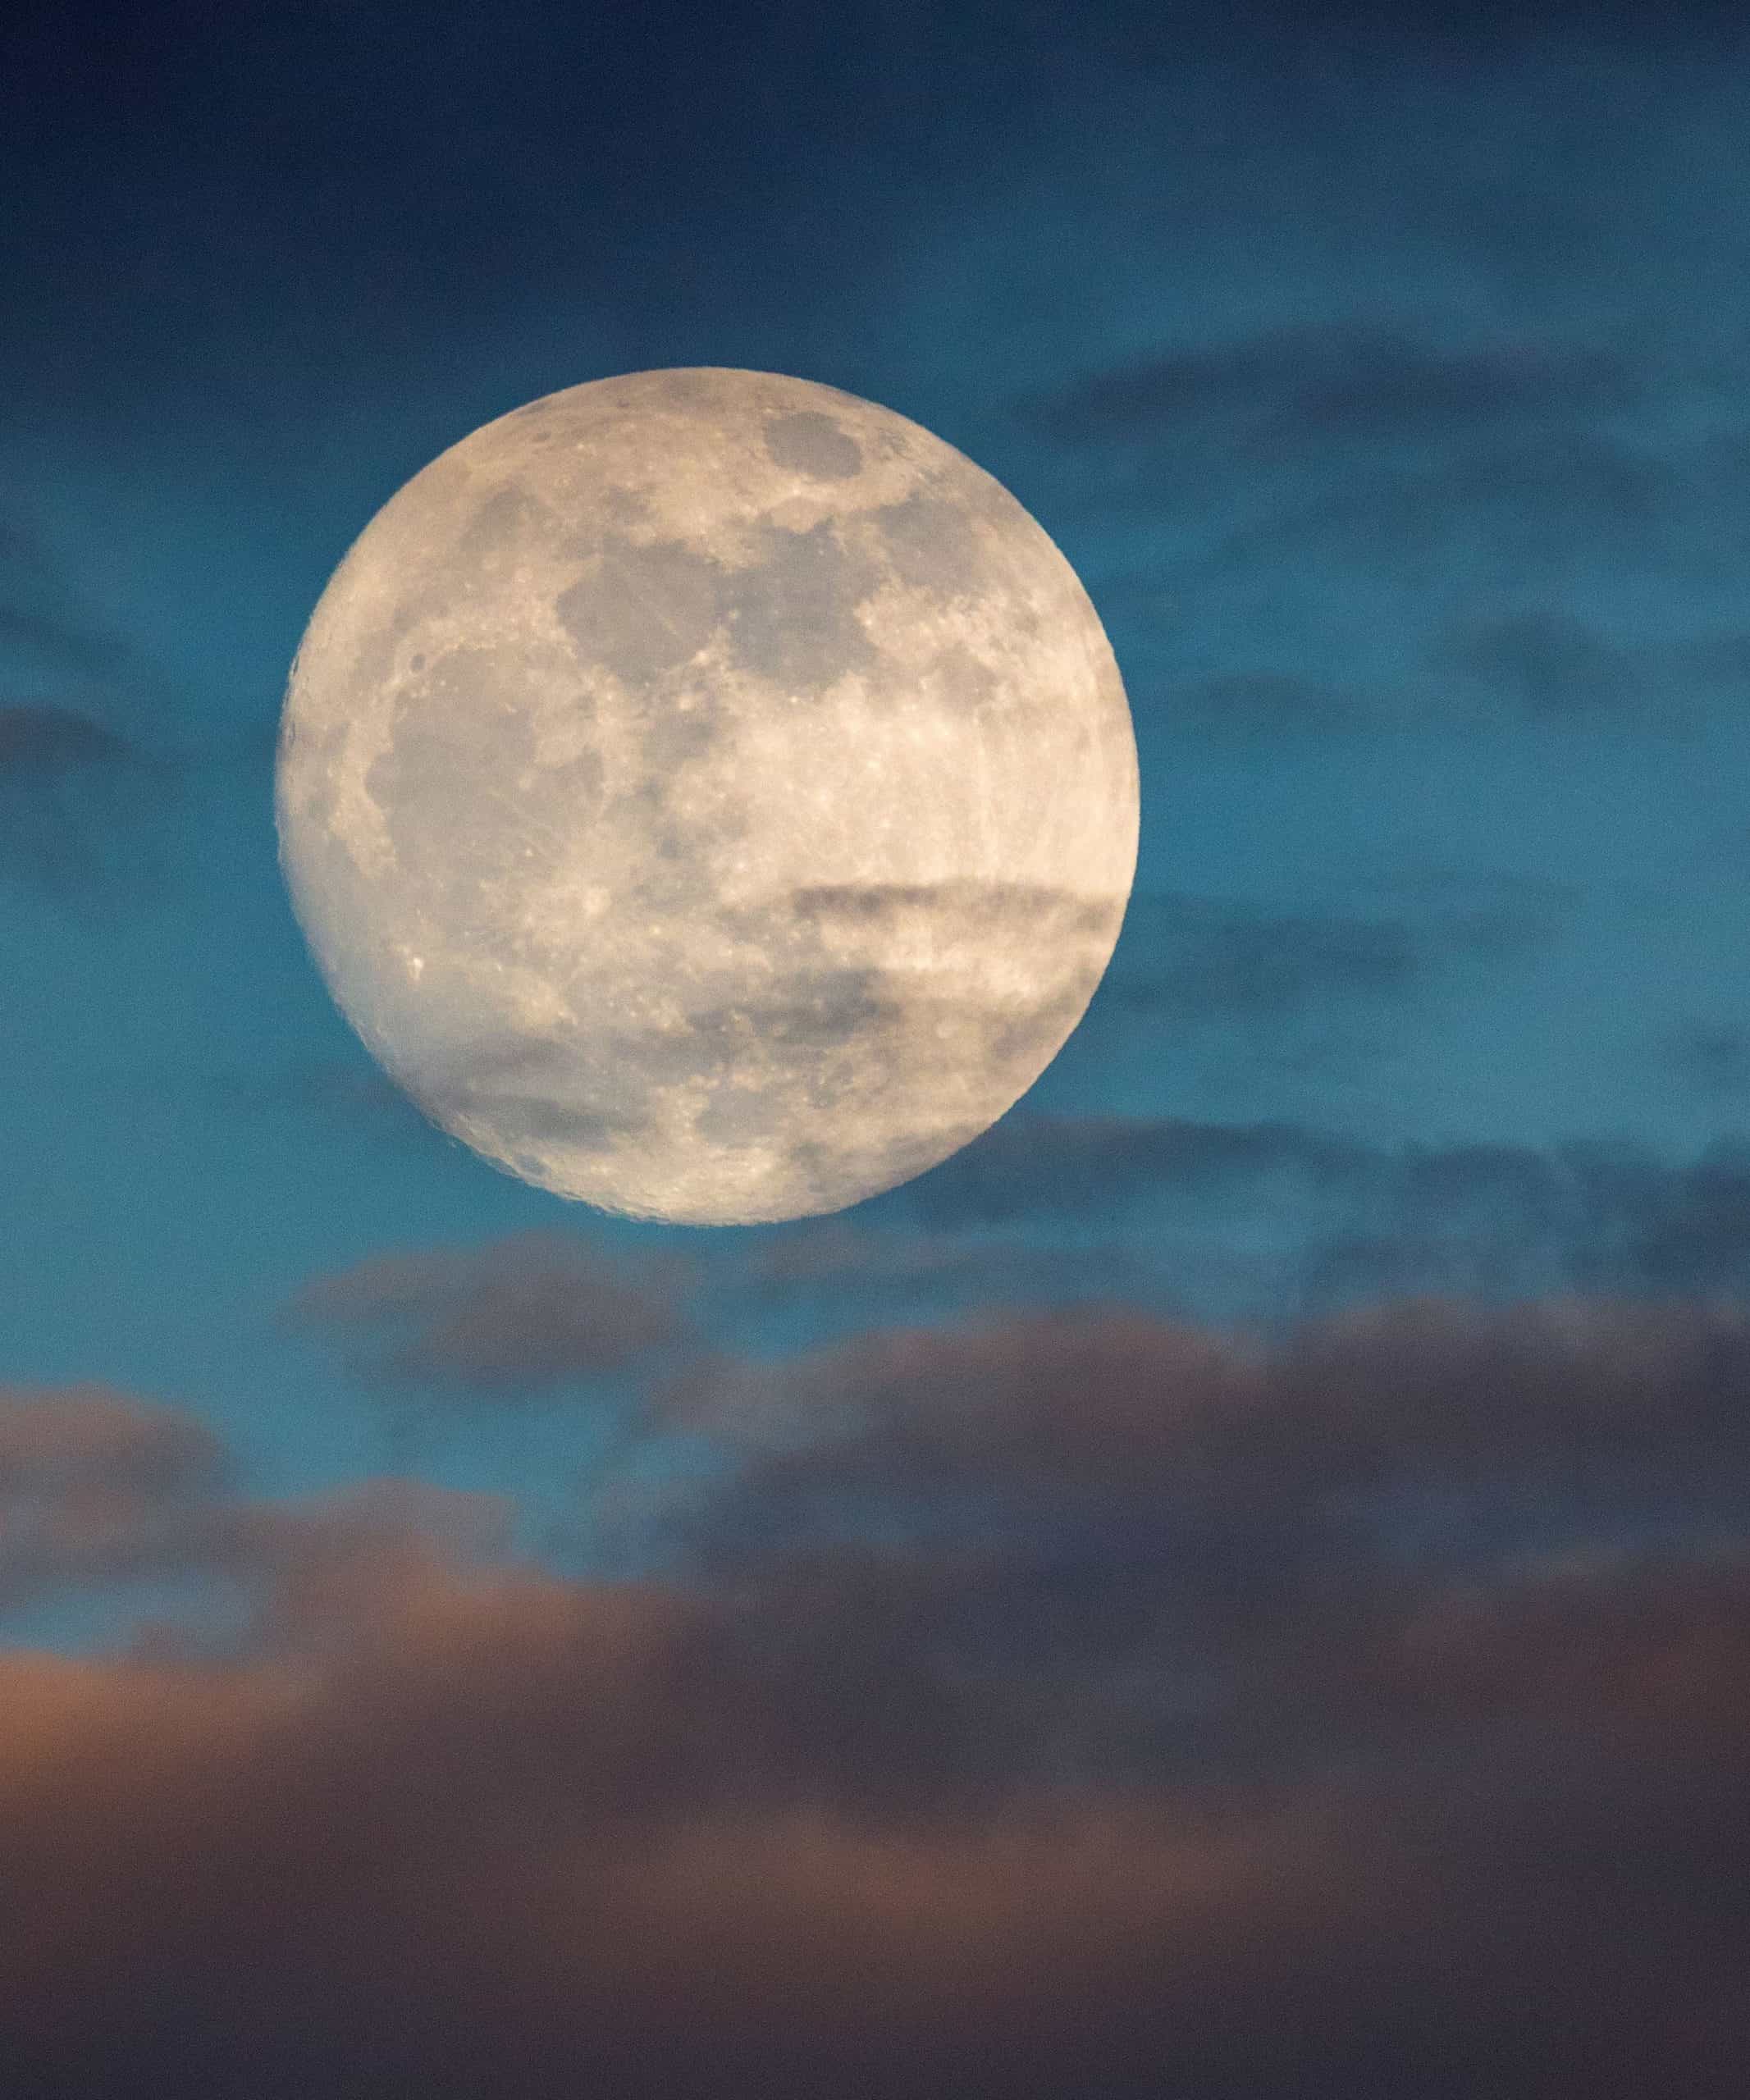 March Full Moon Facts, Information, History, Names & Spiritual Meaning